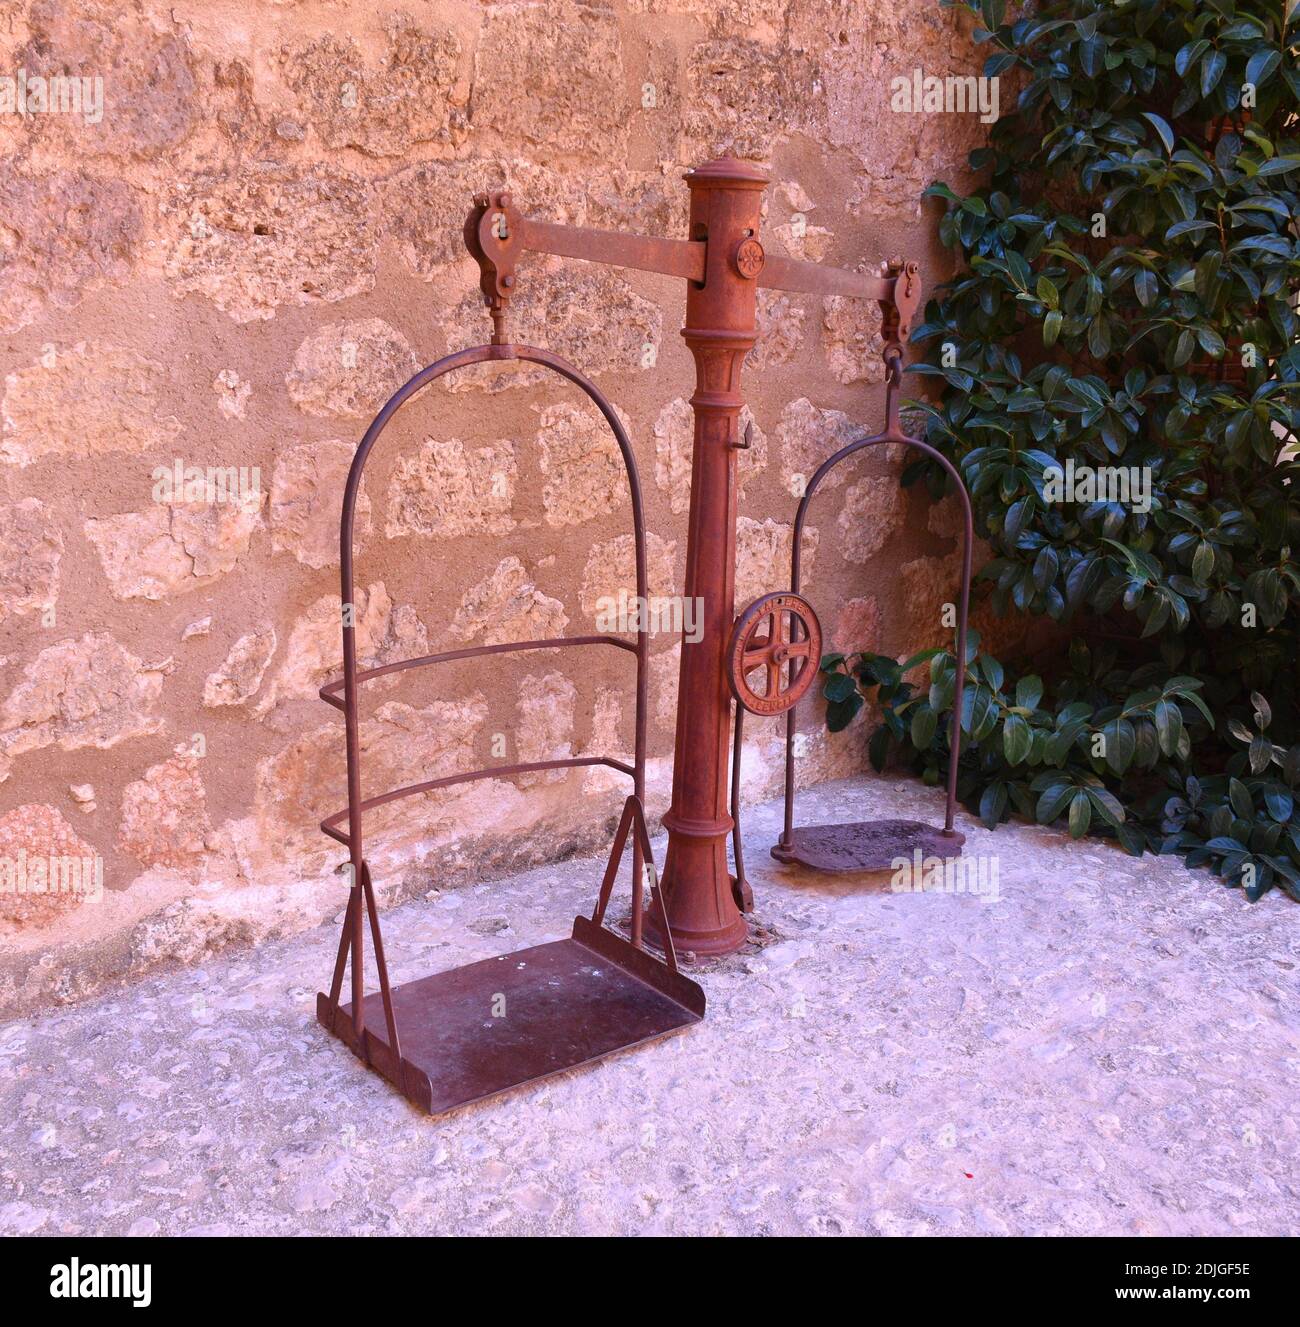 Old iron scale to weigh goods. Castle of Belmonte. Stock Photo